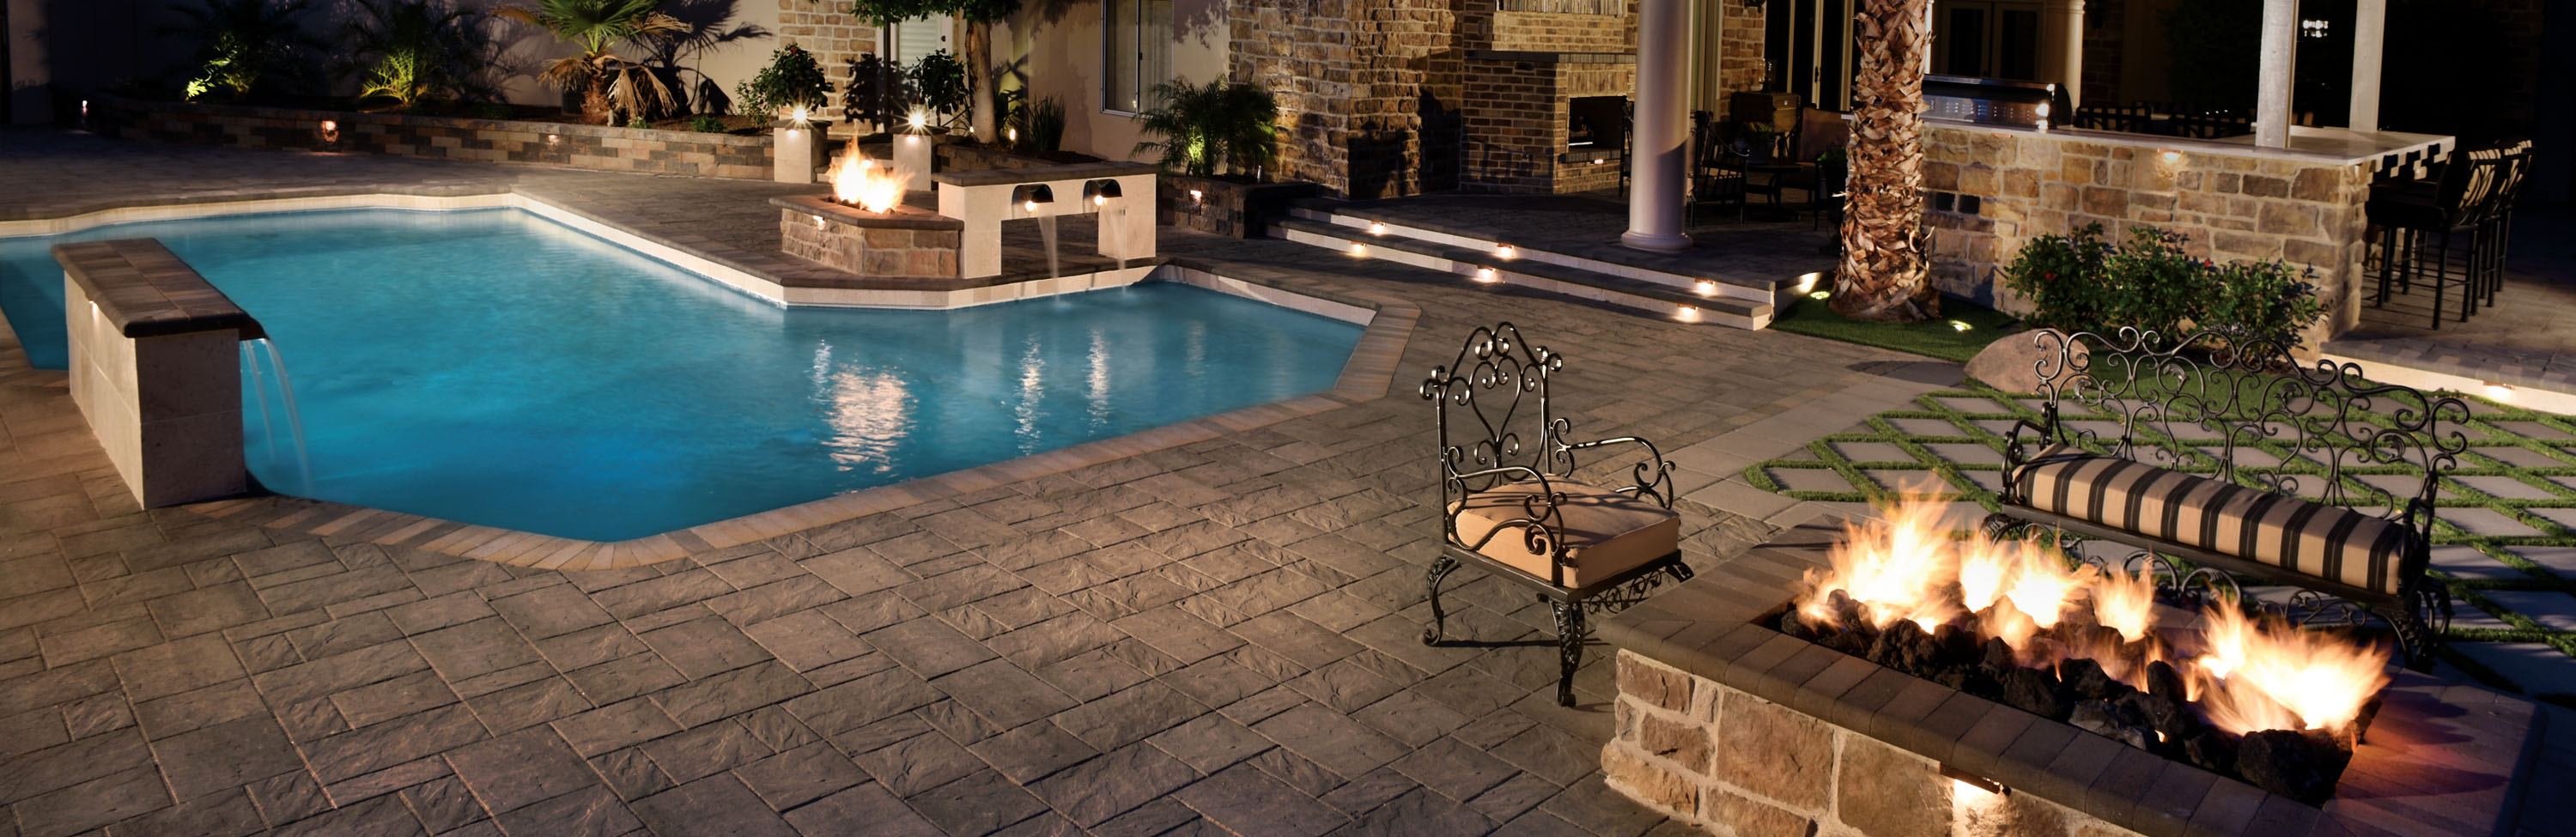 Aztec Stone andcoping in slate color at poolside in night photograph